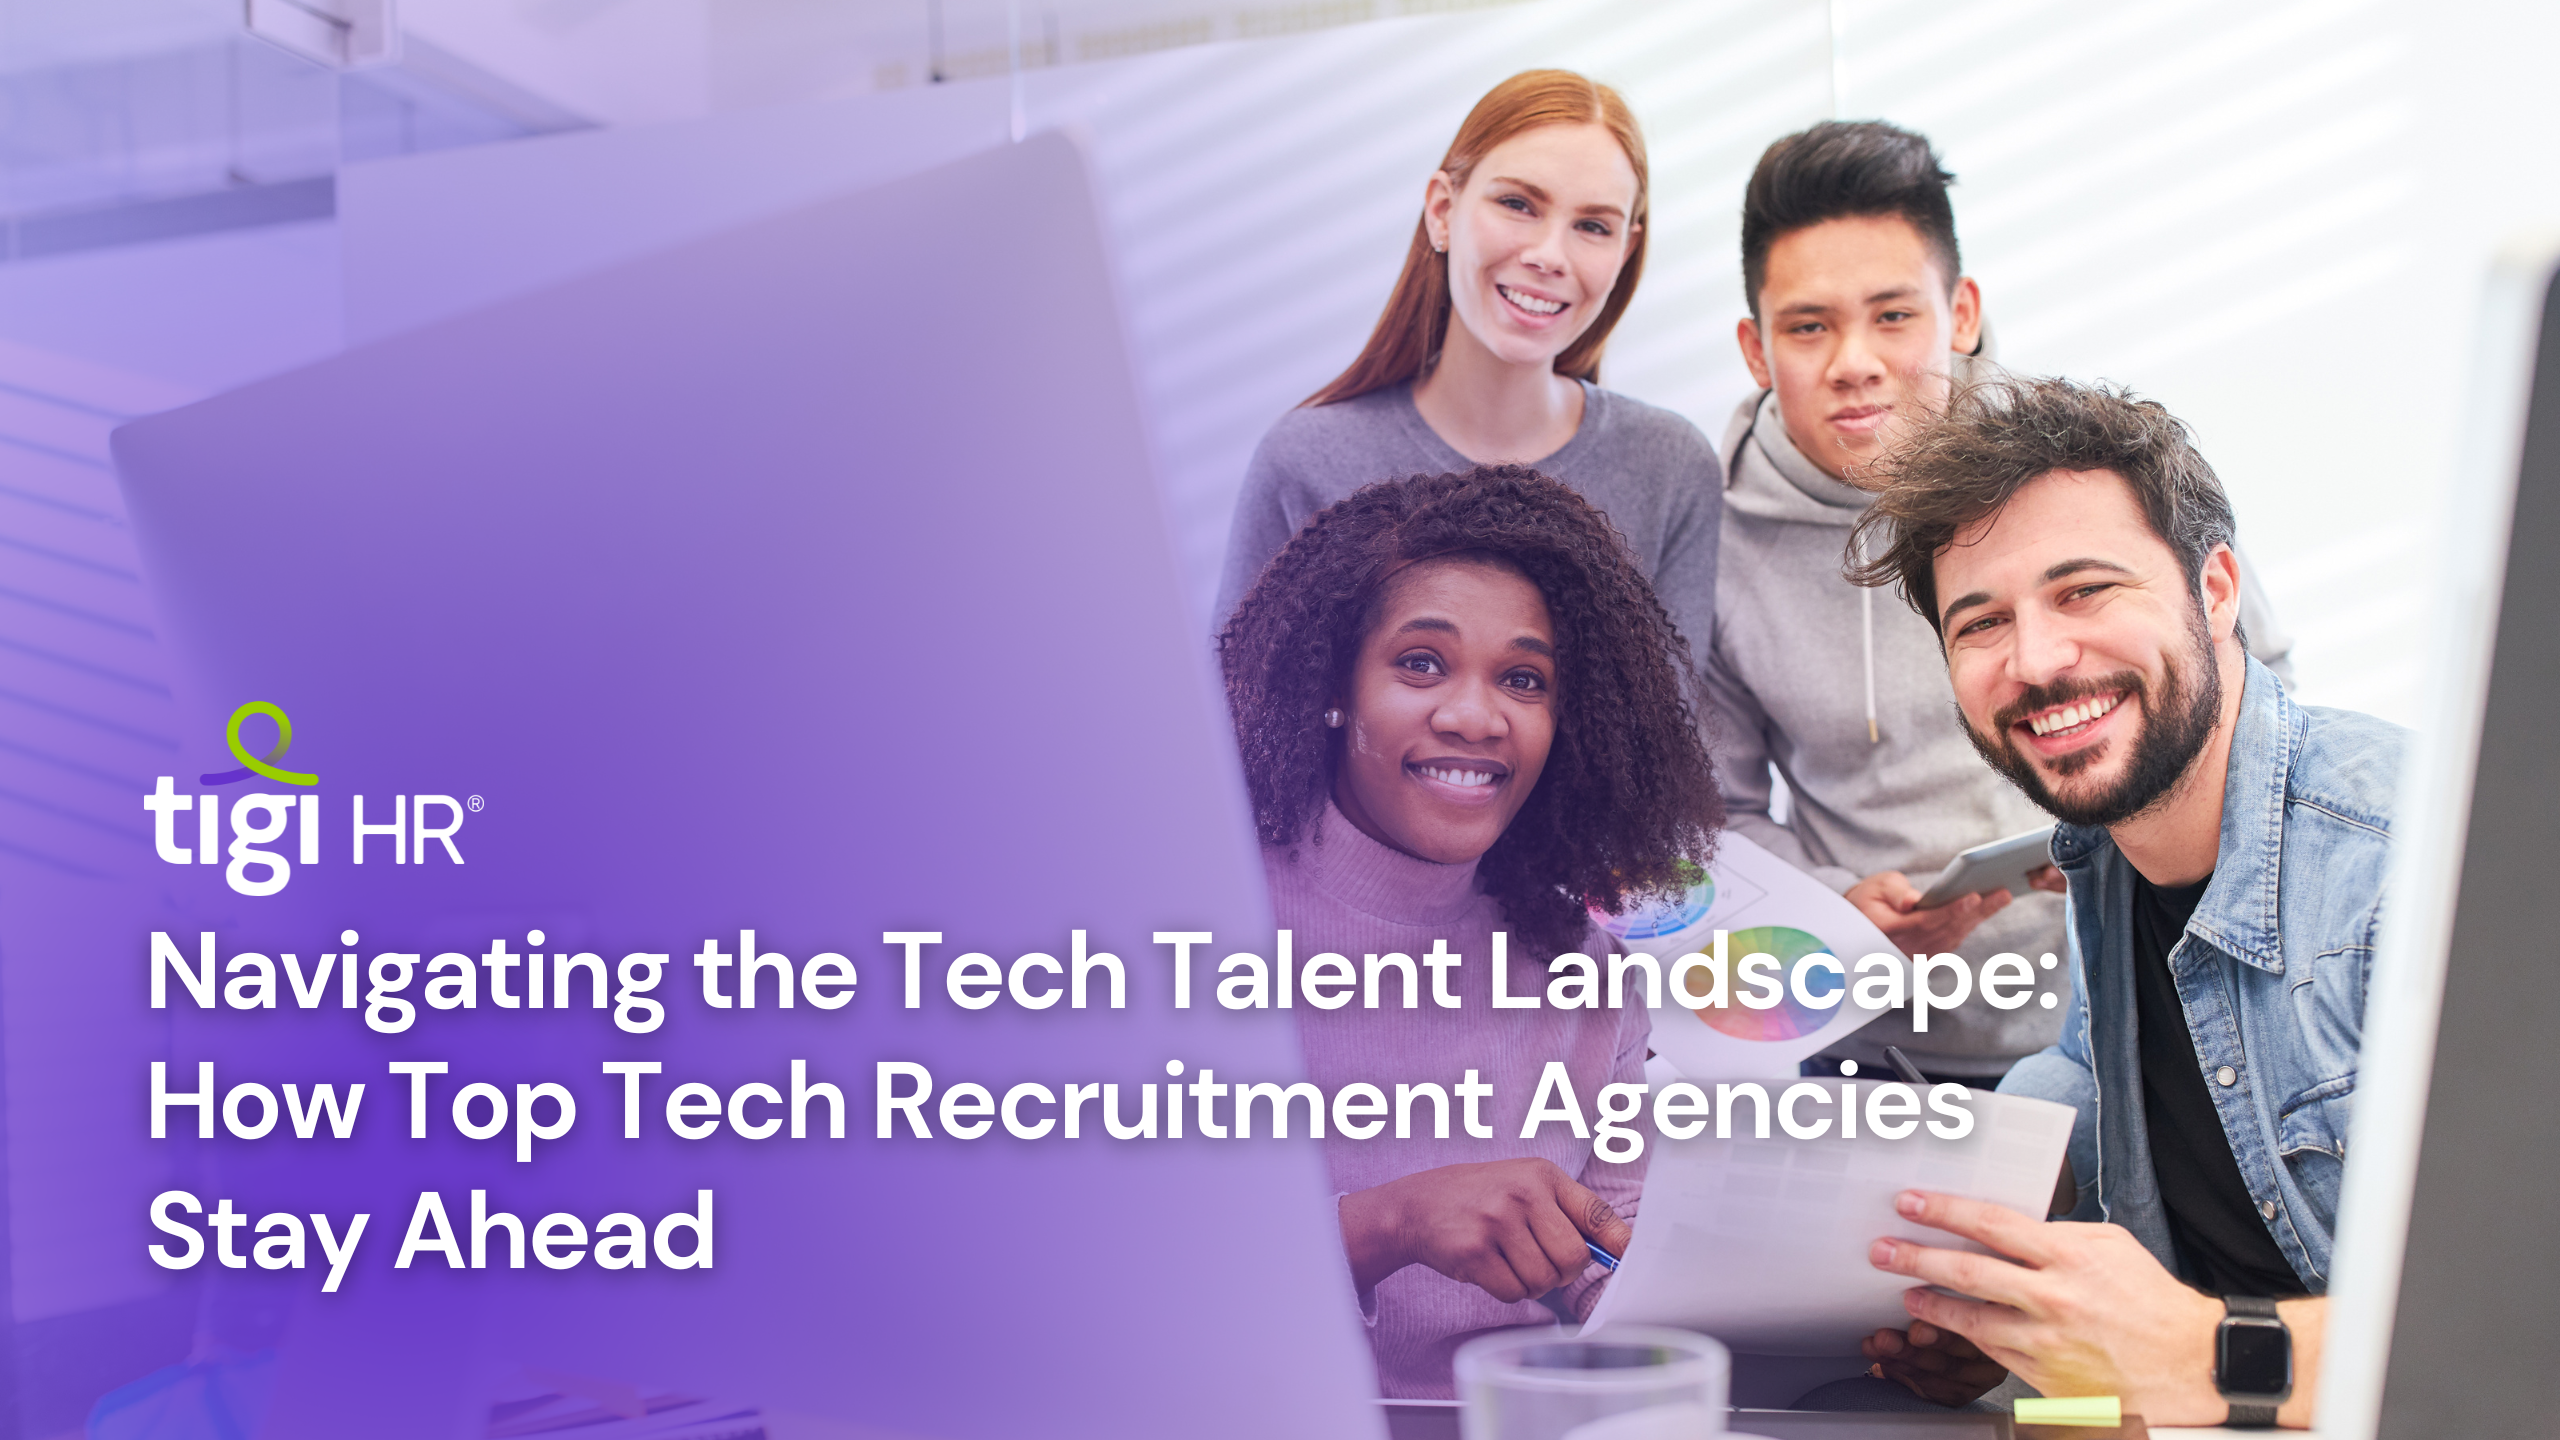 A diverse group of professionals collaborating in a tech office, representing the importance of top talent, emerging technologies, and diversity and inclusion in the tech industry.